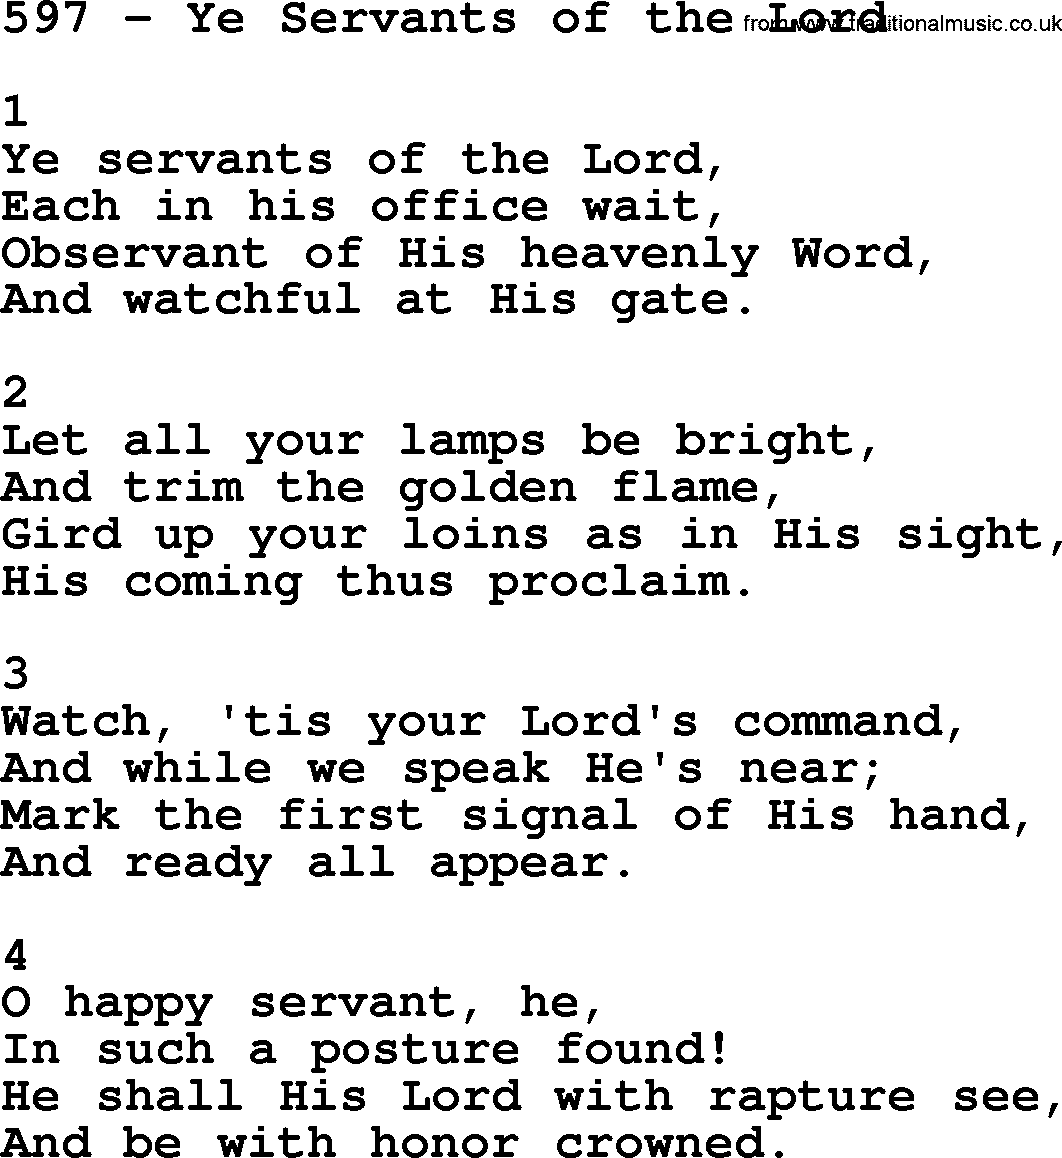 Complete Adventis Hymnal, title: 597-Ye Servants Of The Lord, with lyrics, midi, mp3, powerpoints(PPT) and PDF,